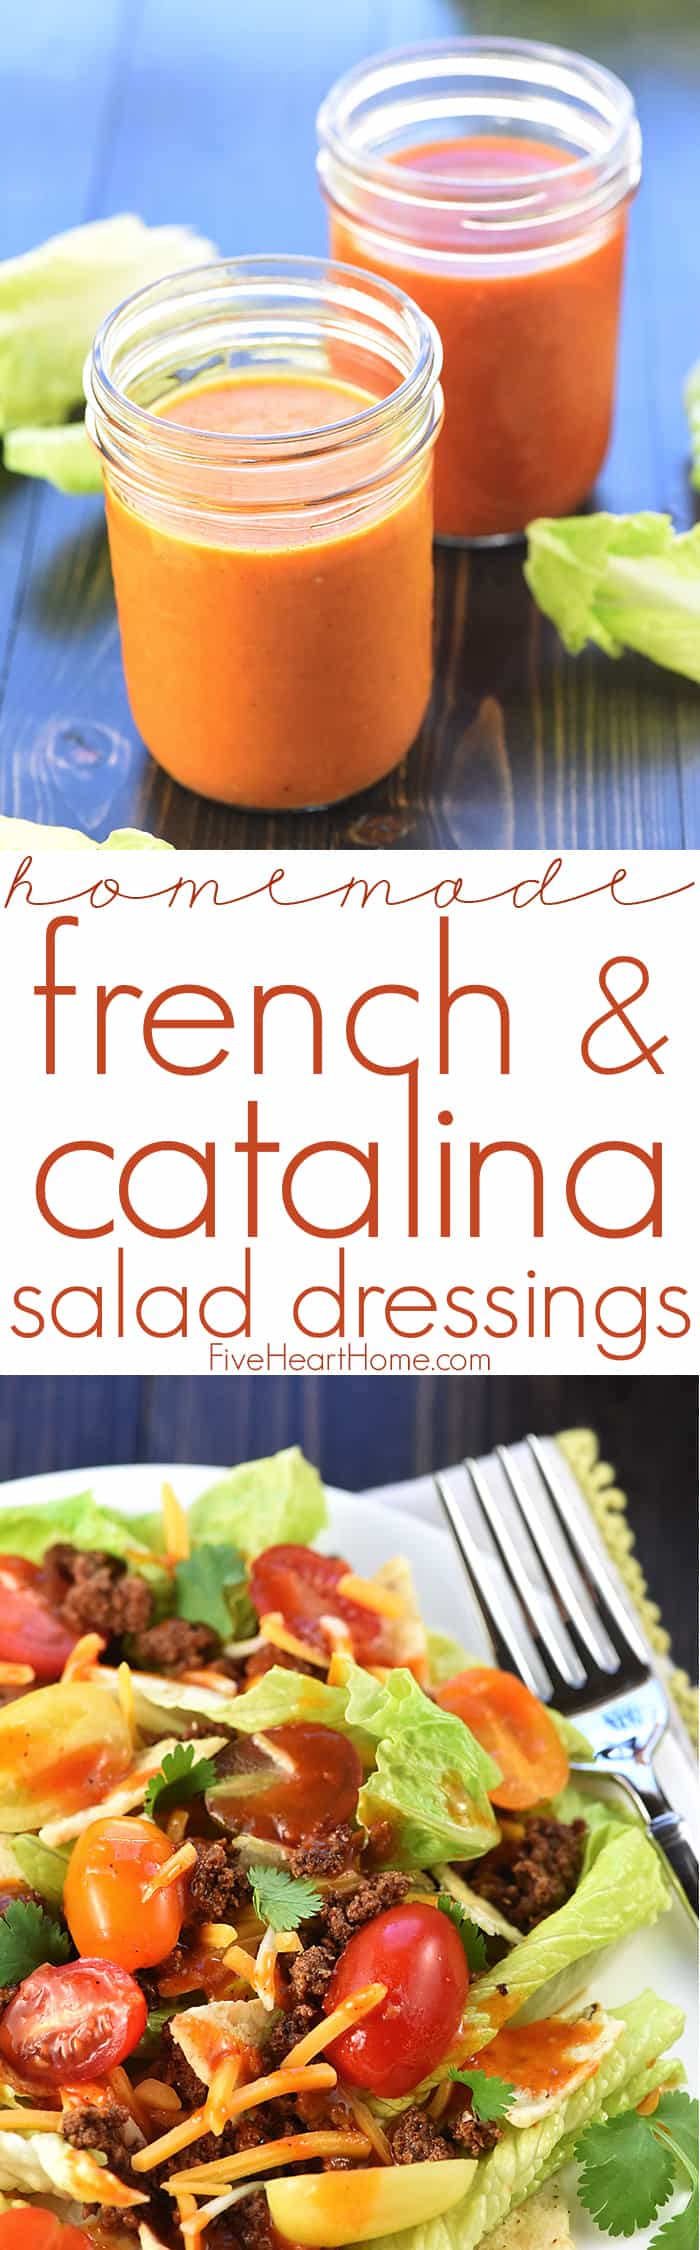 Homemade French Dressing & Catalina Dressing ~ jazz up your favorite salads with this sweet-and-tangy dressing recipe, in French and Catalina varieties! | FiveHeartHome.com via @fivehearthome